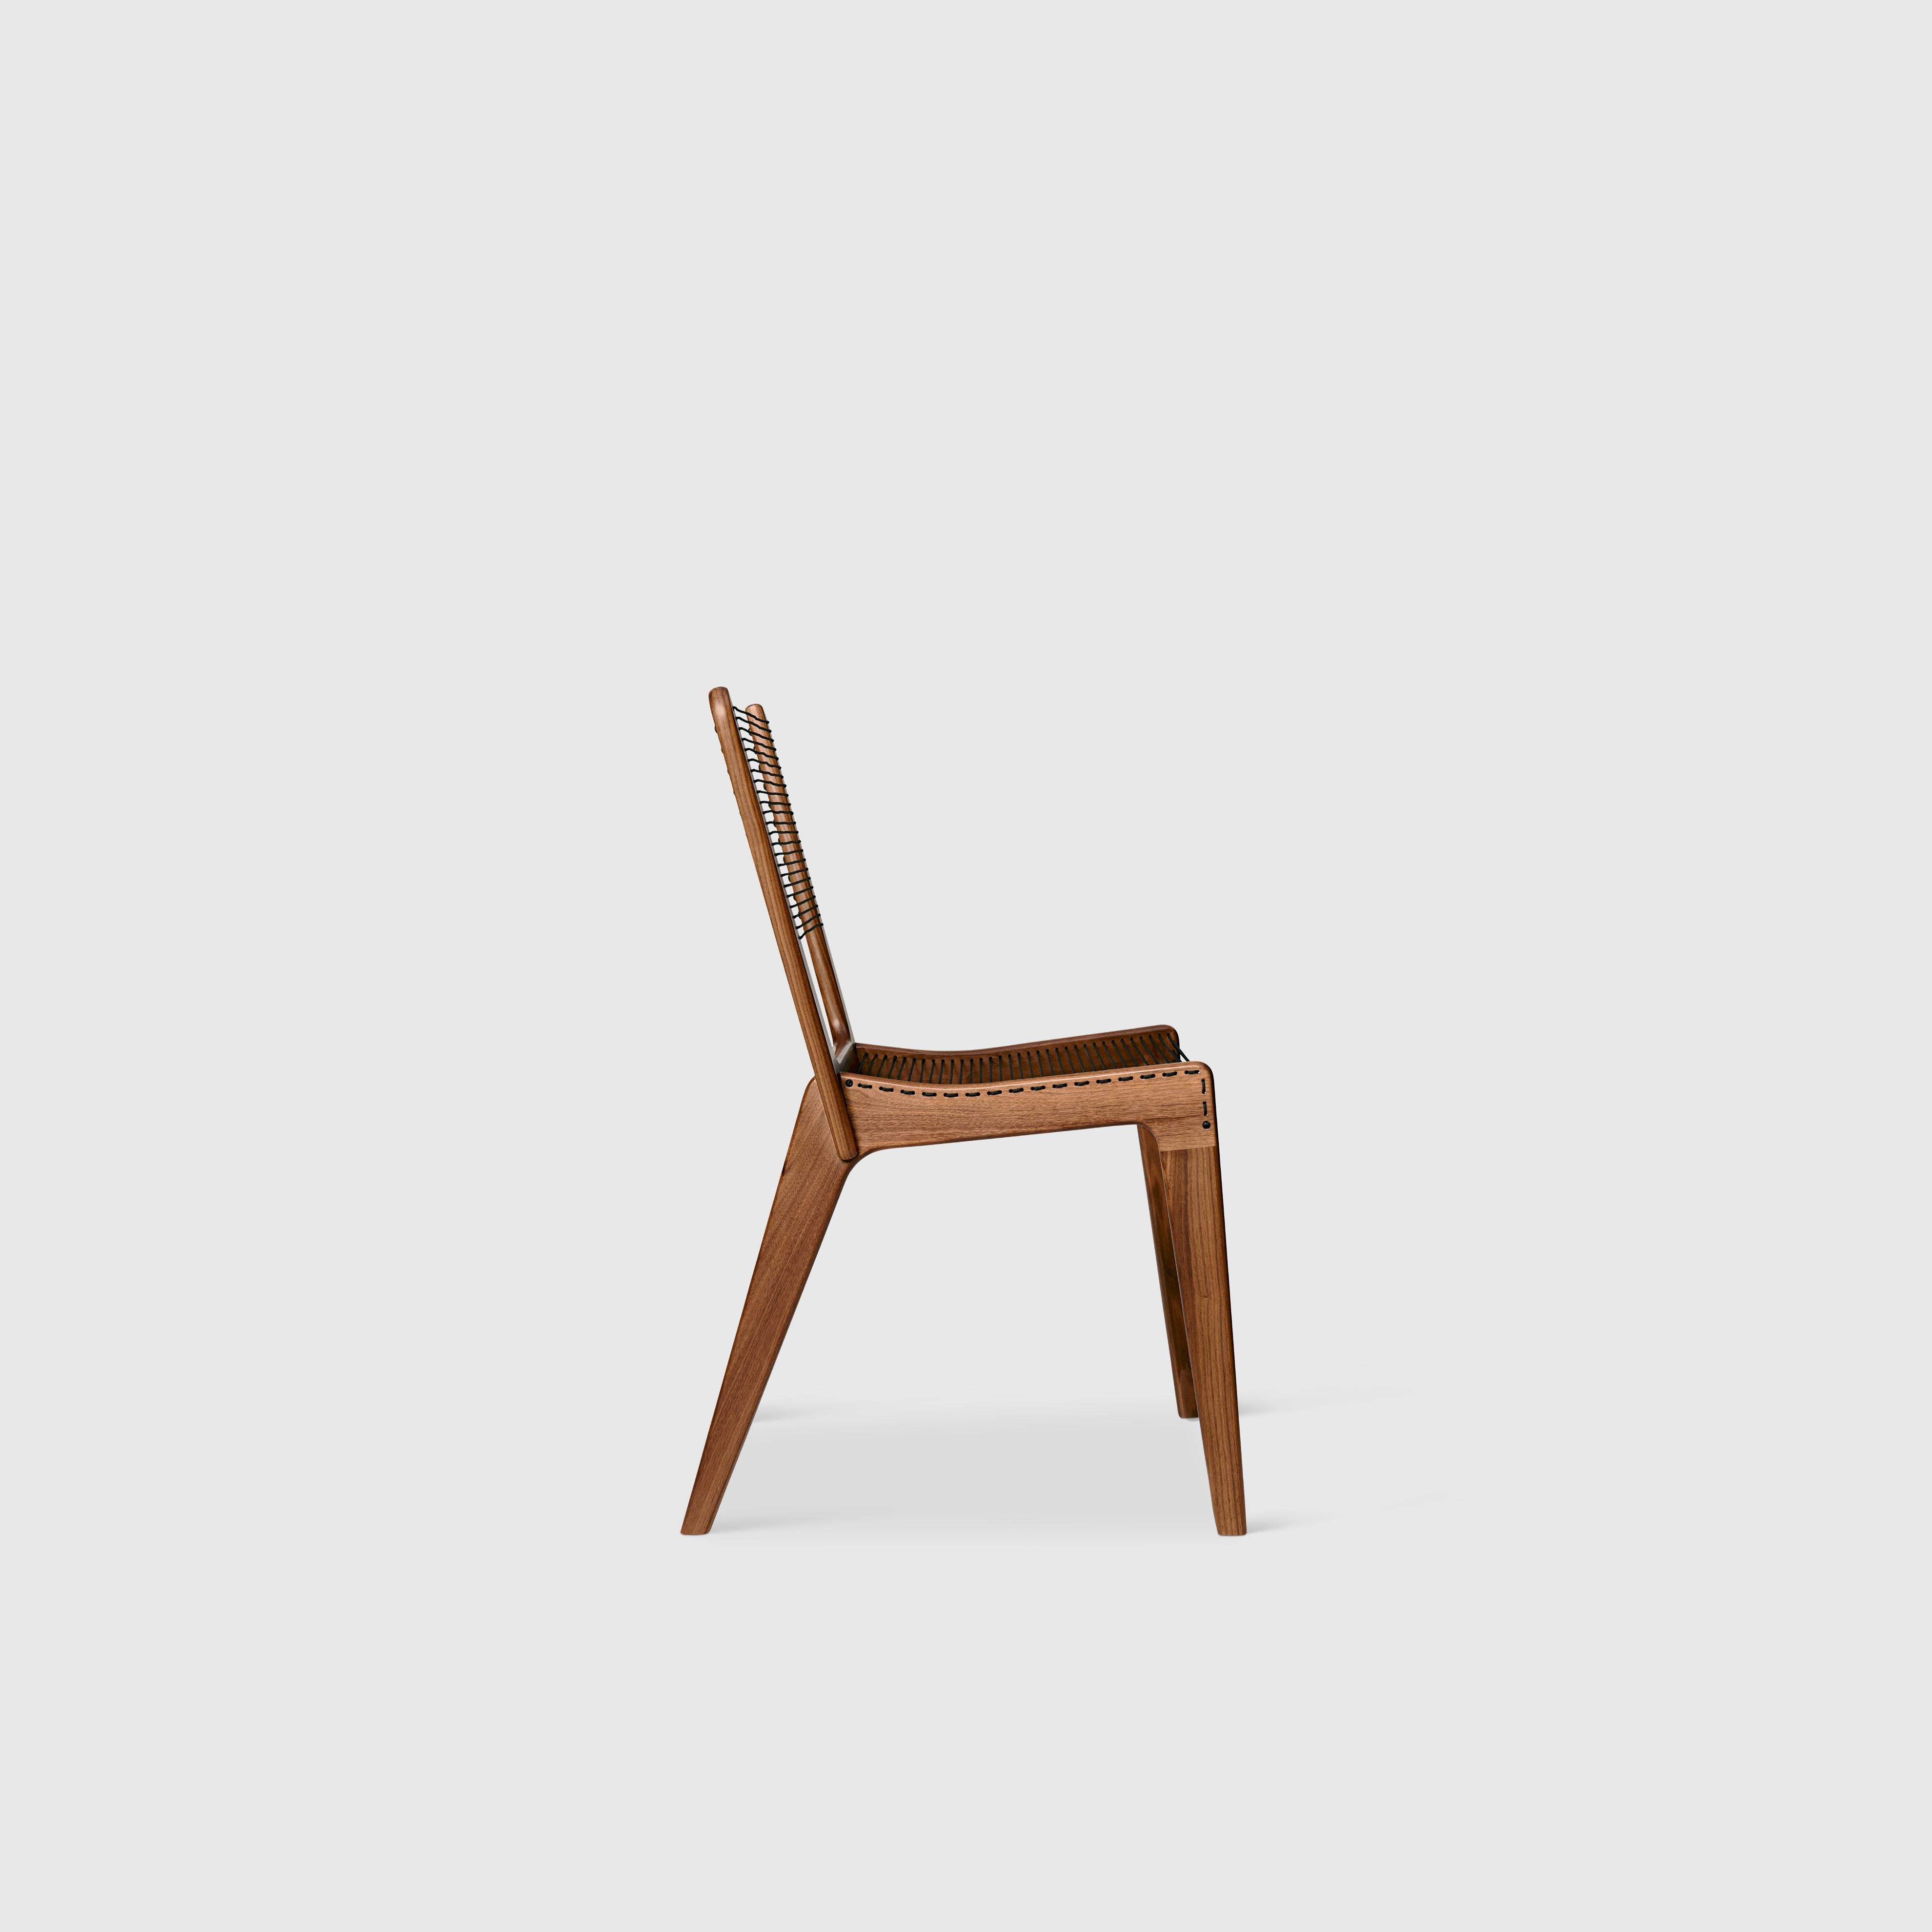 A Classic piece of Mid-Century Modern design, the cord chair was conceived in 1953 by Jacques Guillon. The chair’s wood frame in solid walnut is paired with cord that is tightly strung like a tennis racket, supporting a surprising amount of weight;